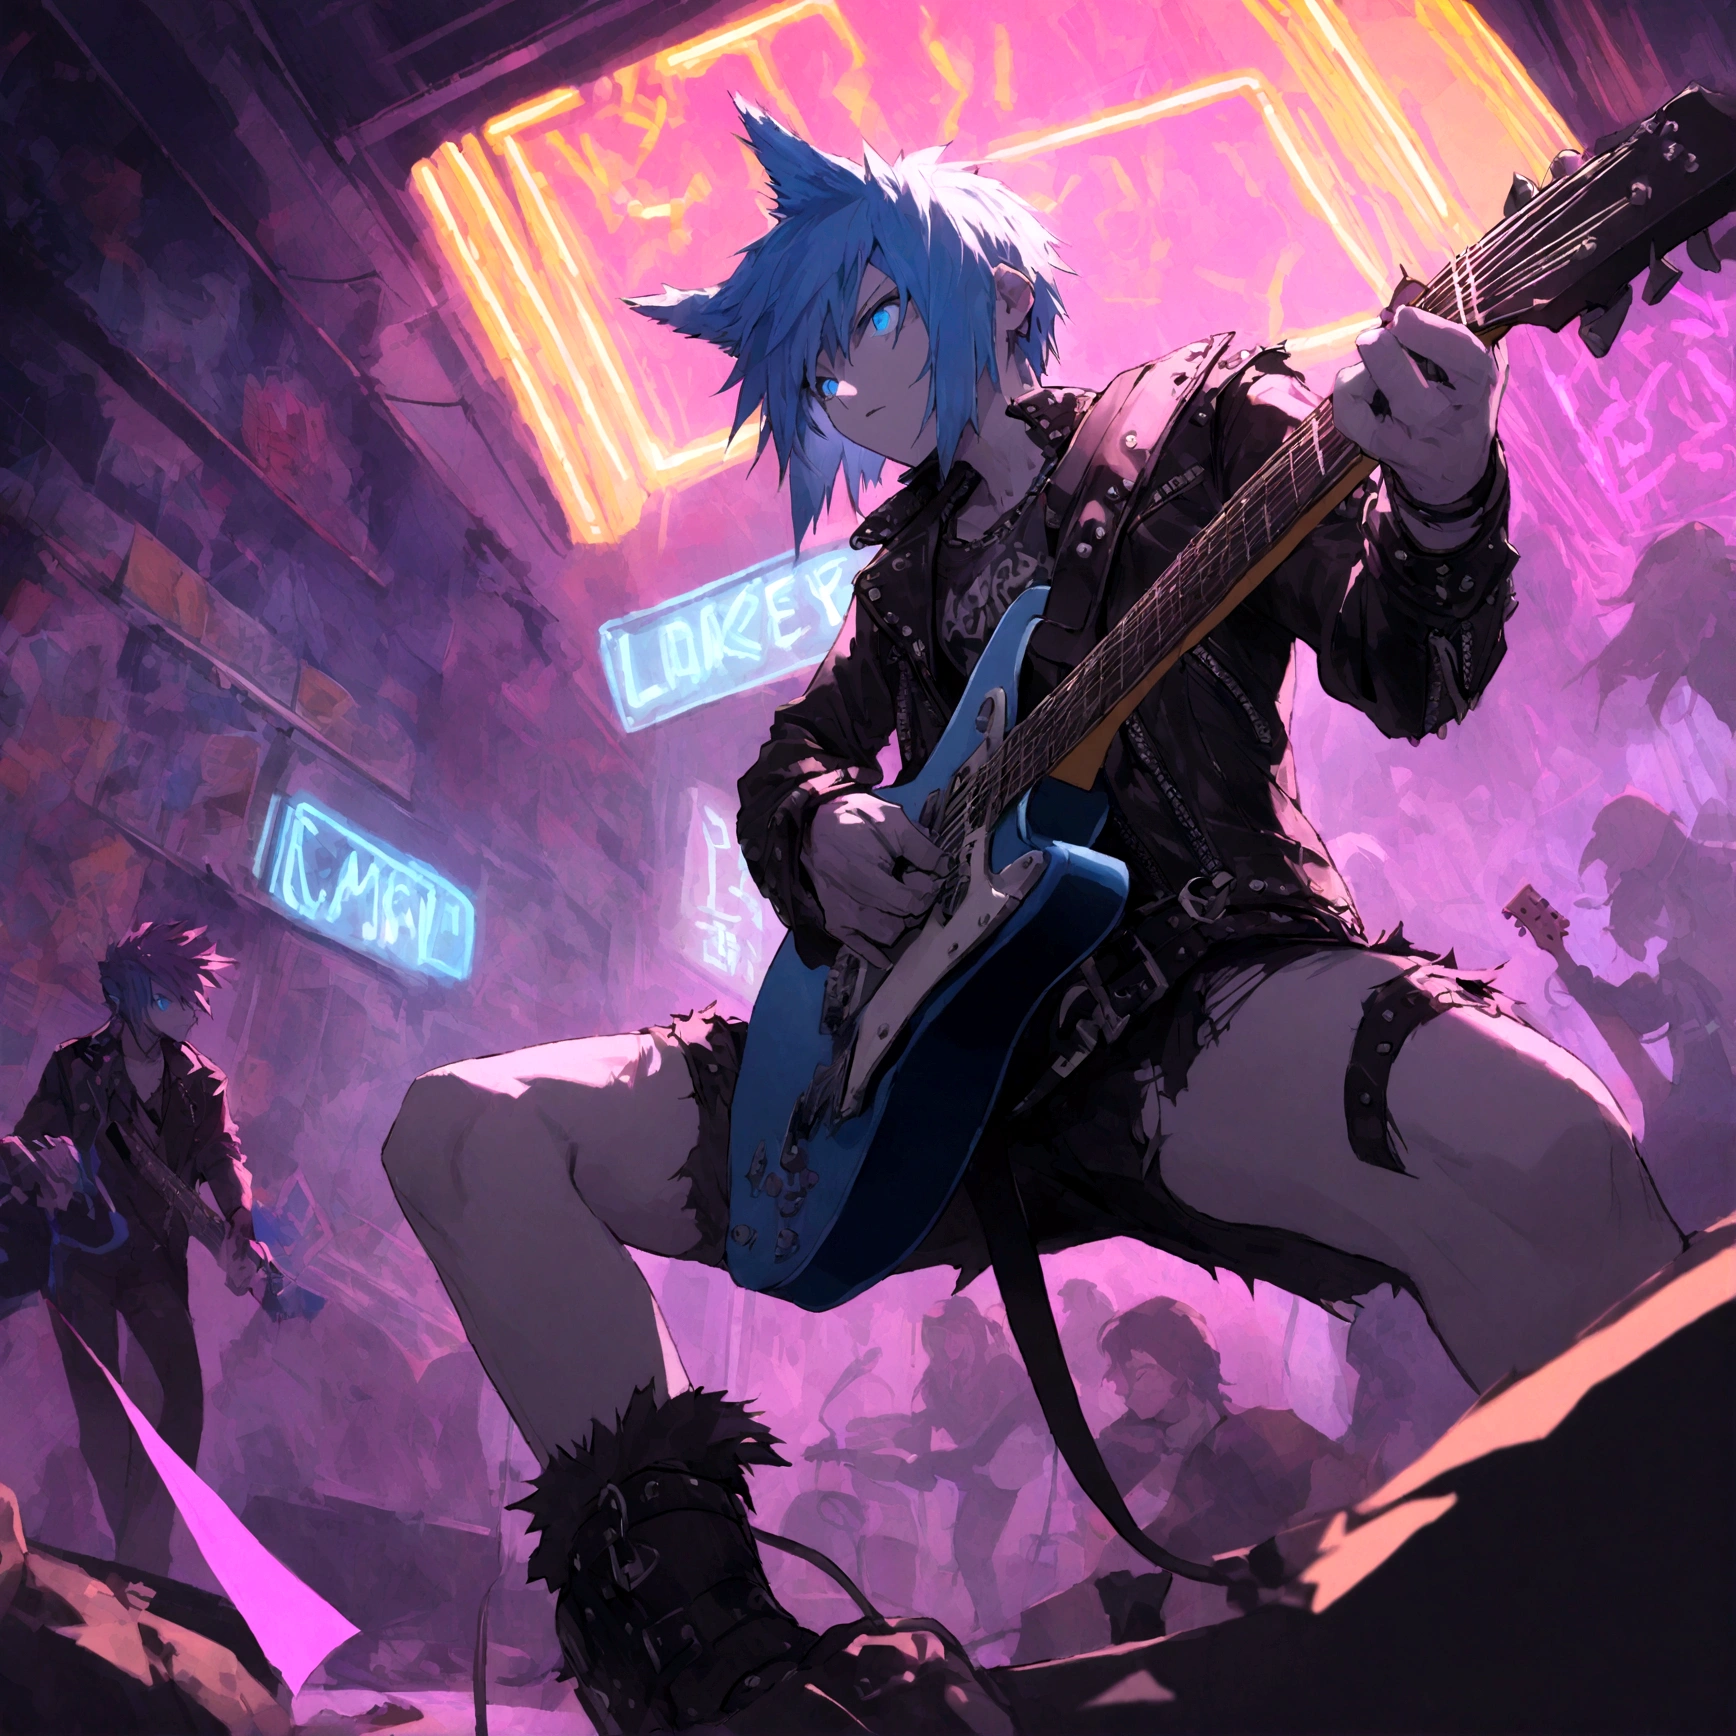 a white werewolf with blue eyes wearing a punk outfit playing the lead guitar in a band, has blue mowhawk, has leather patched jacket, wearing torn boots, shredding on guitar, many multi colored neon lights